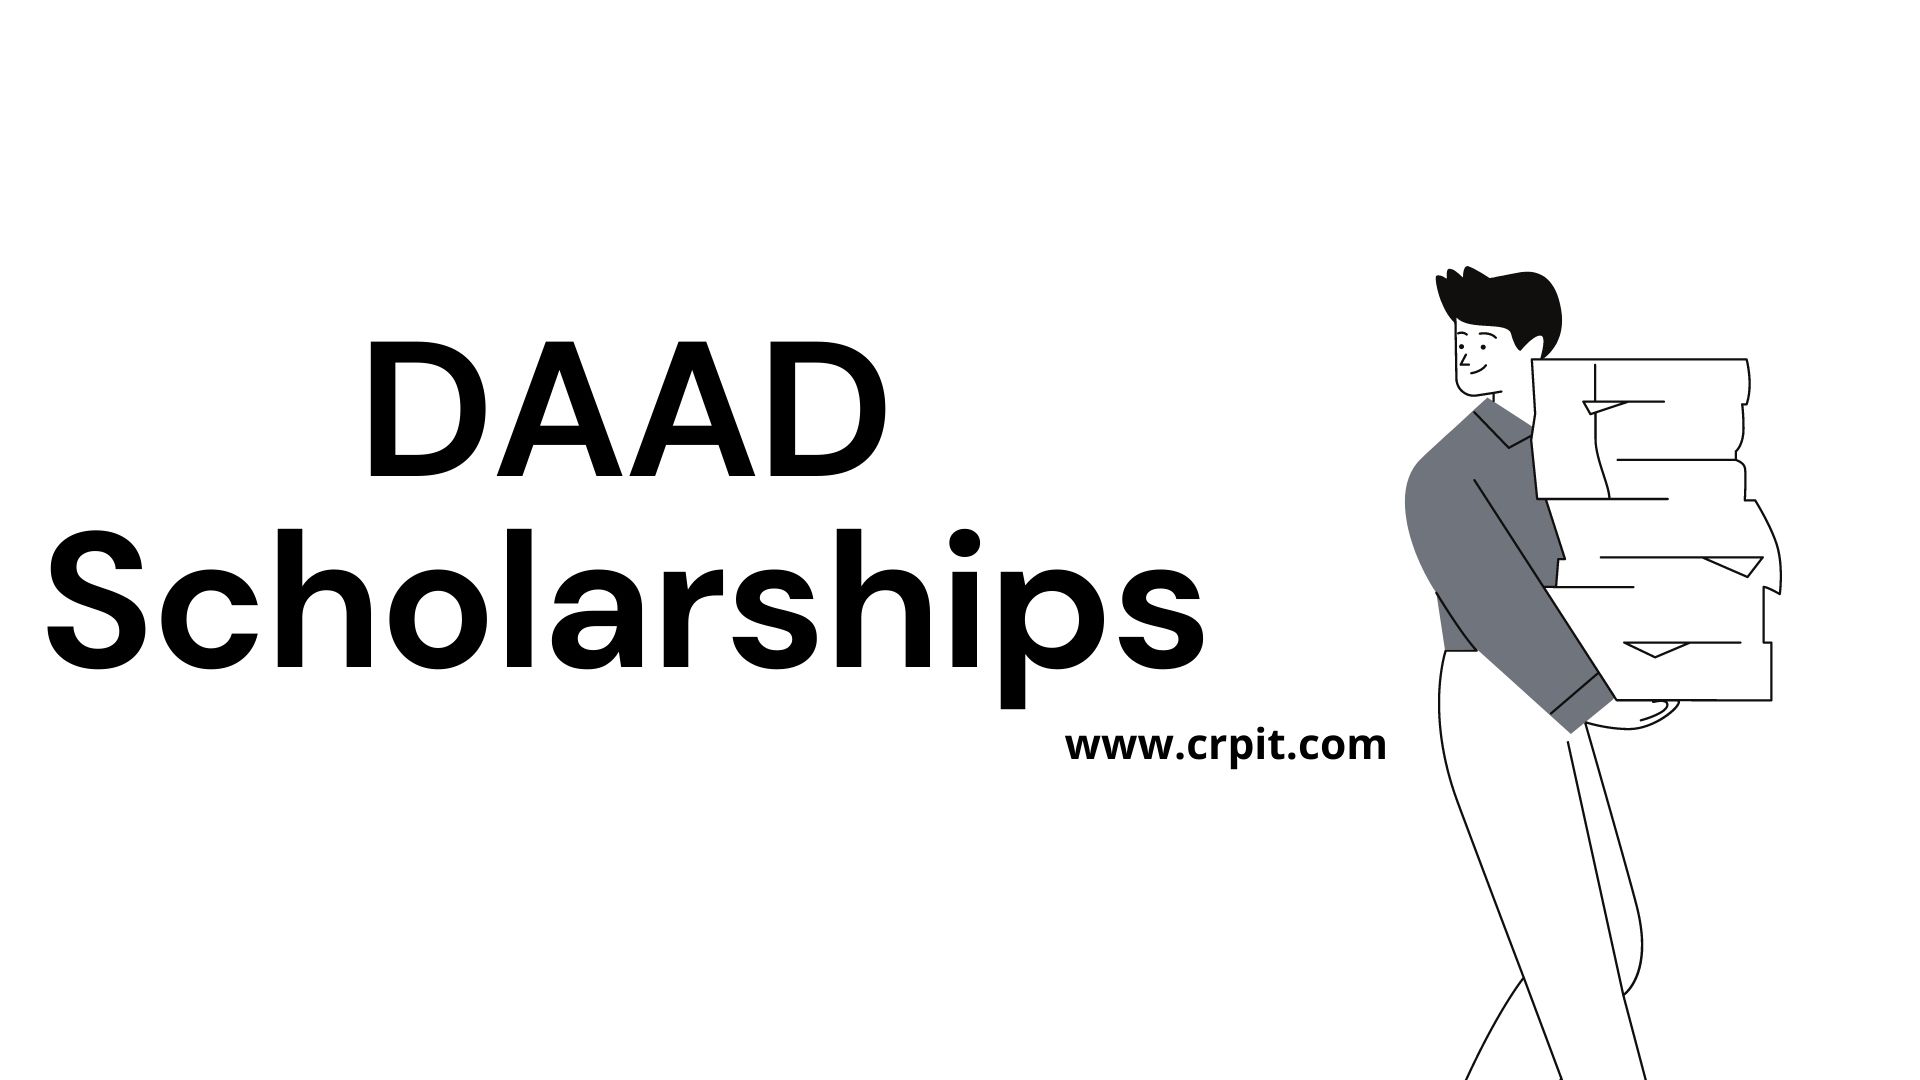 DAAD Scholarships in Germany for Development Related Postgraduate Courses